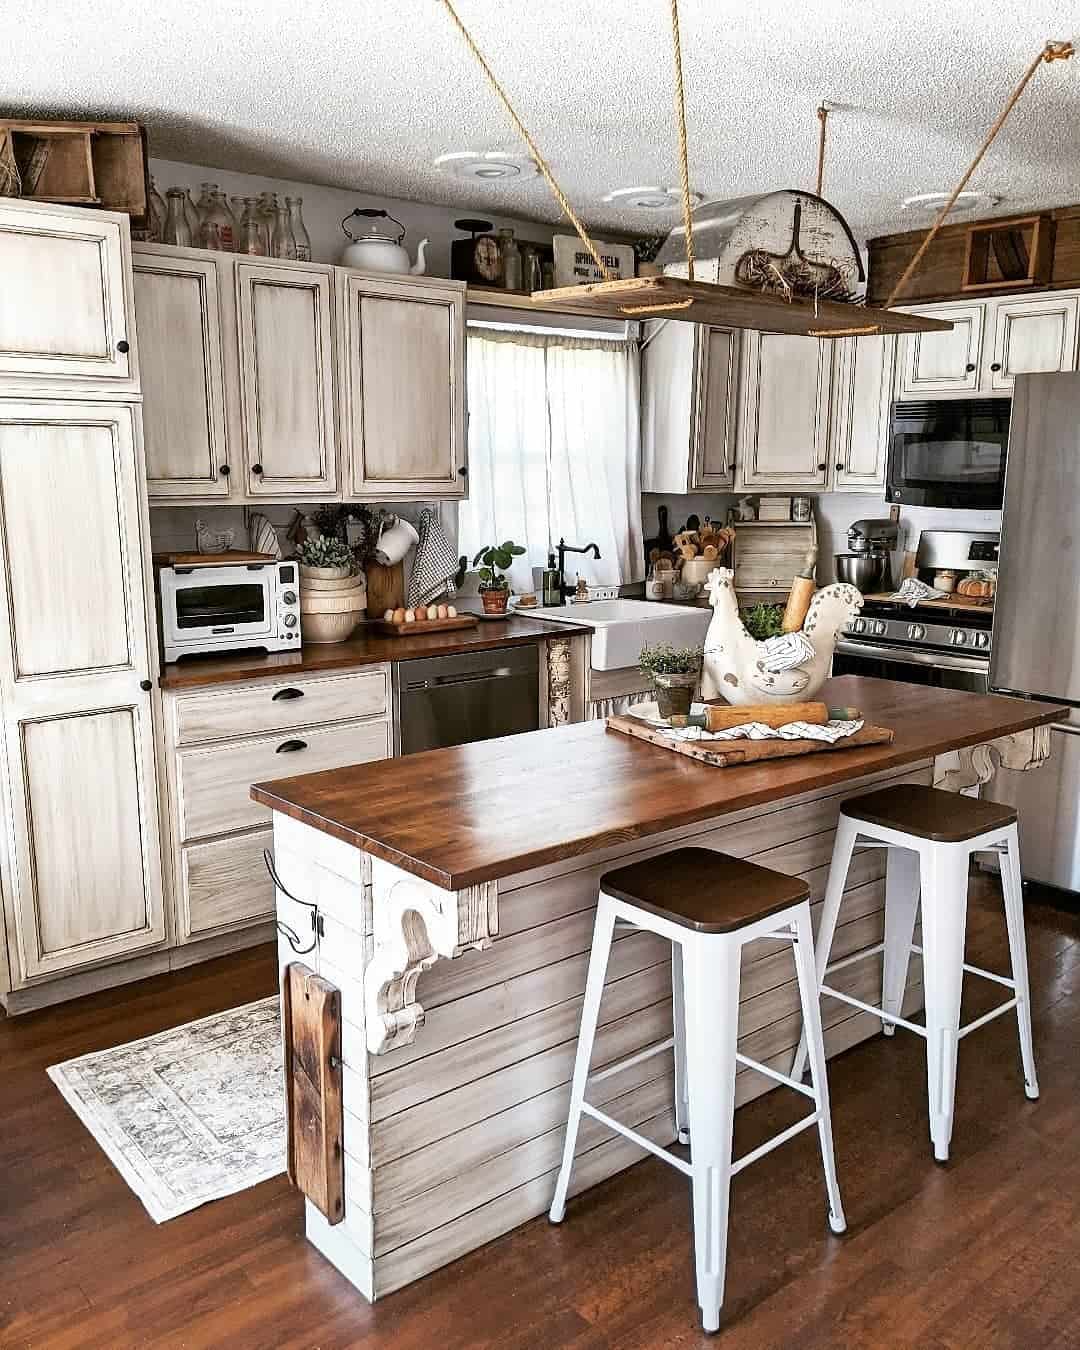 20 Rustic Kitchen Island Ideas for a Timeless Farmhouse Look